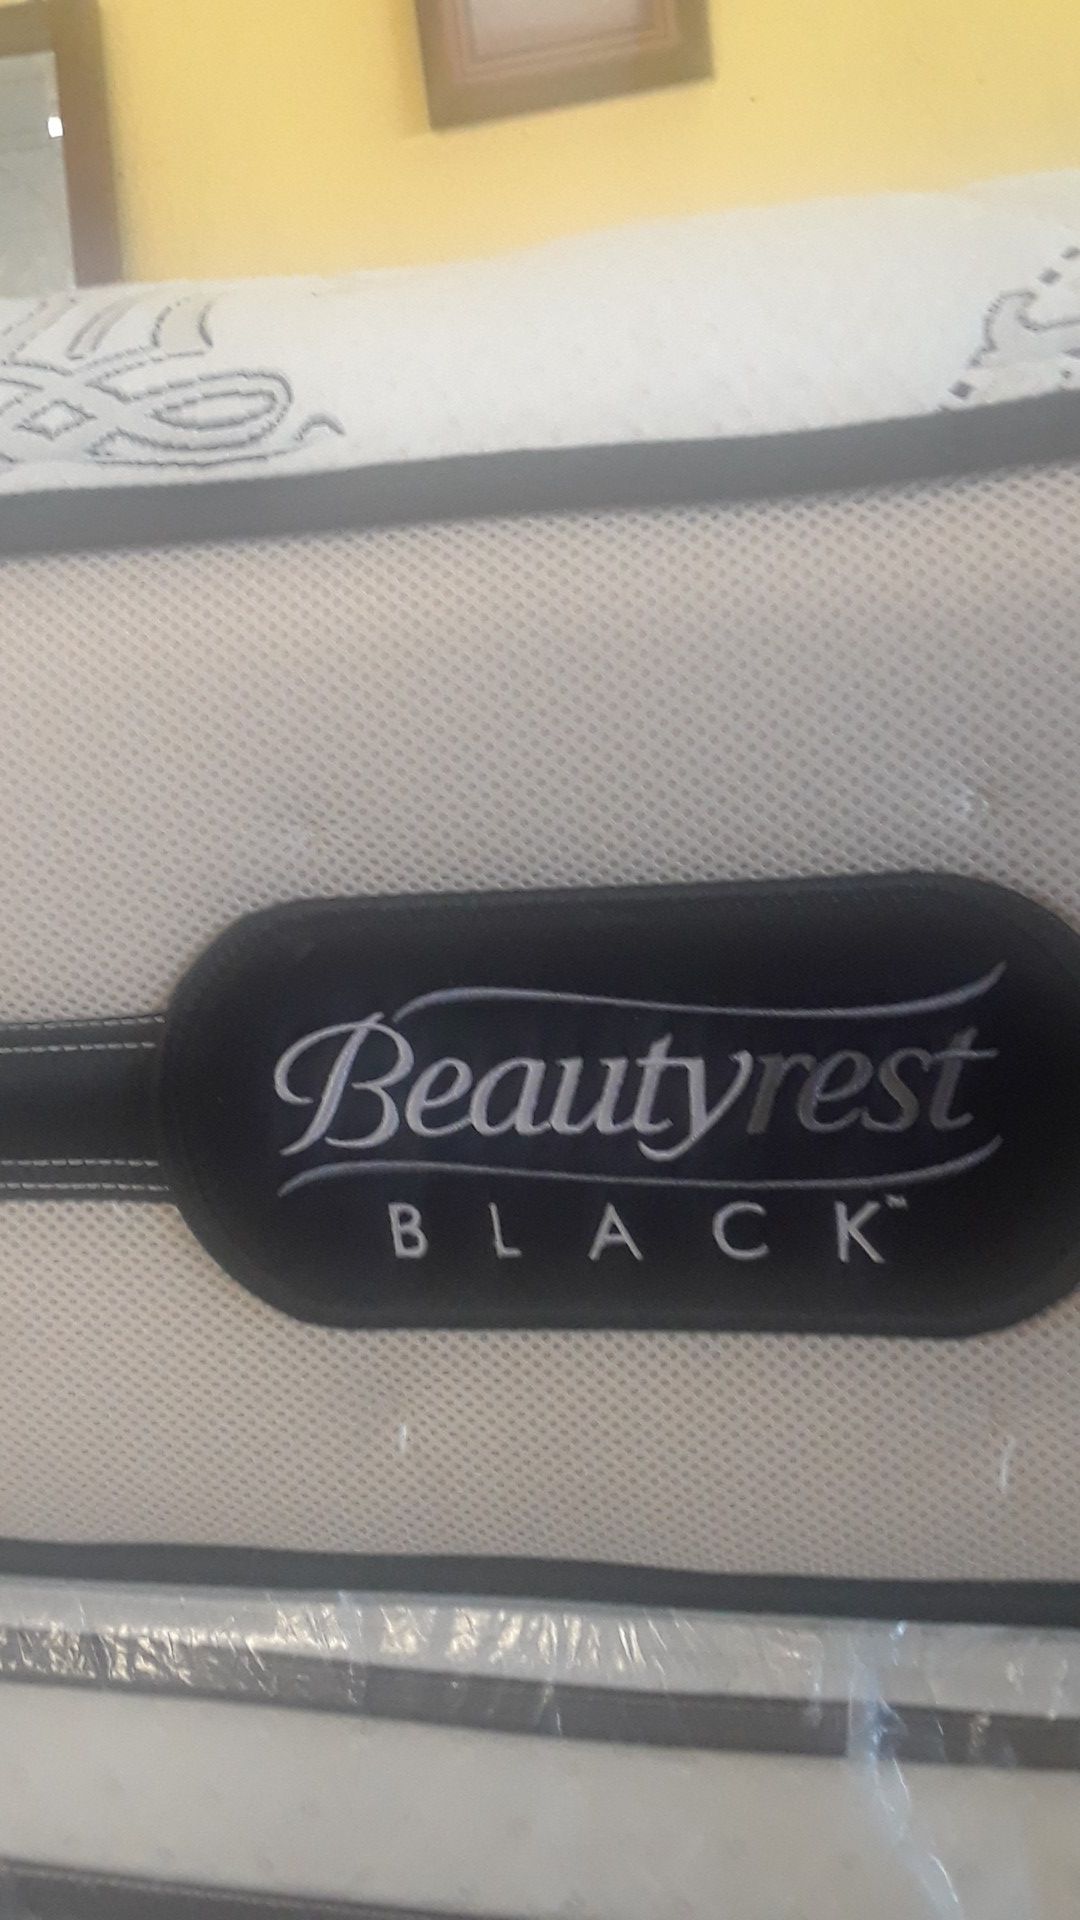 QUEEN MUESTRA SUAVE BLACK BEAUTYREST BY SIMMONS